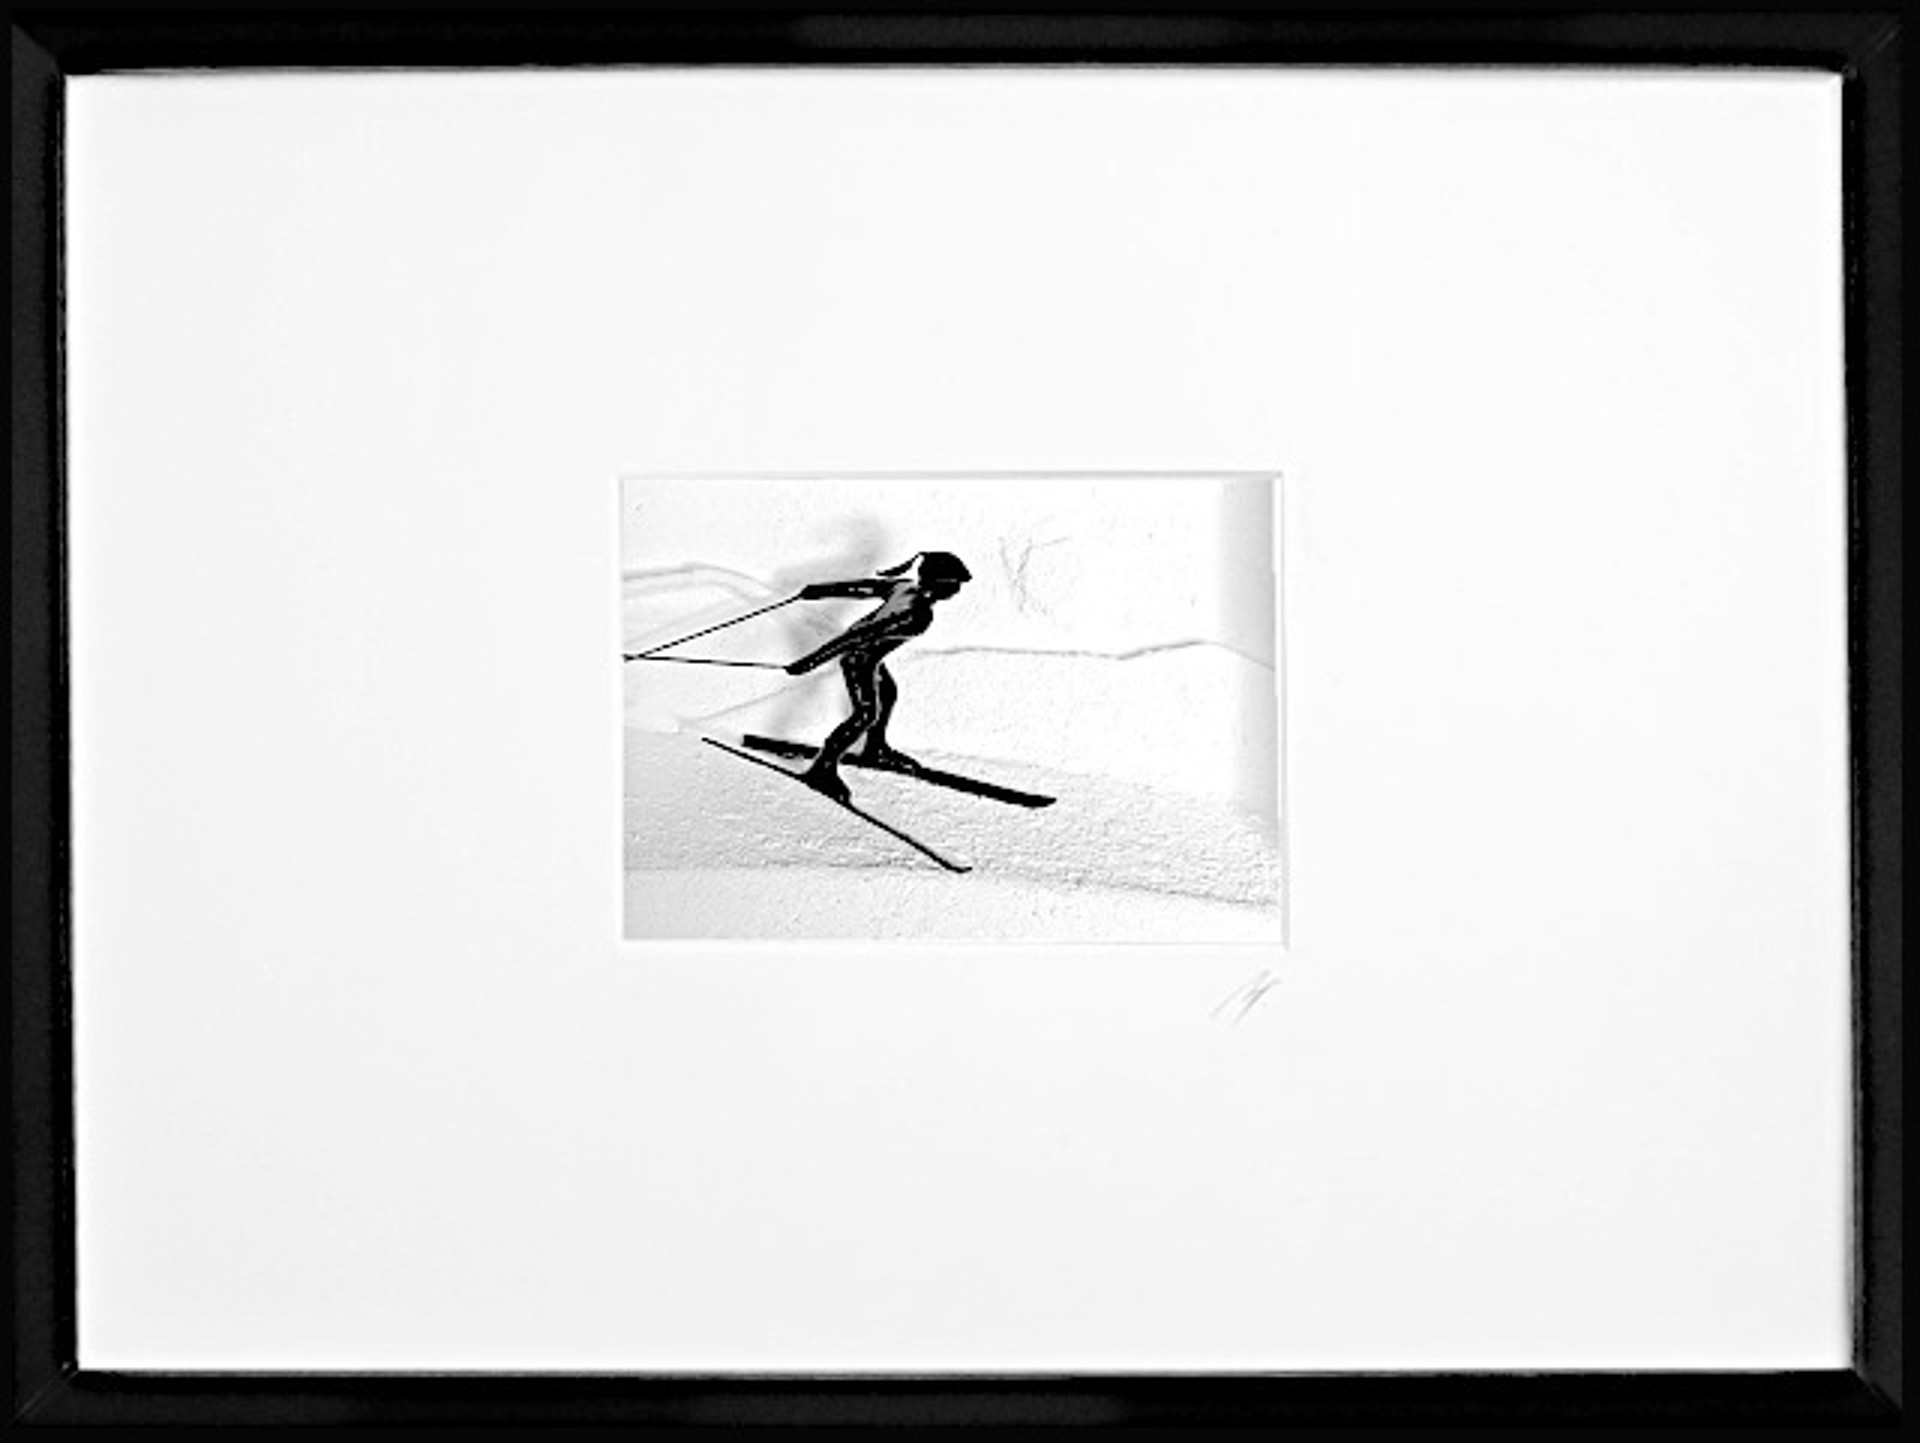 Work Out - Framed 659414 by Pavel Barta